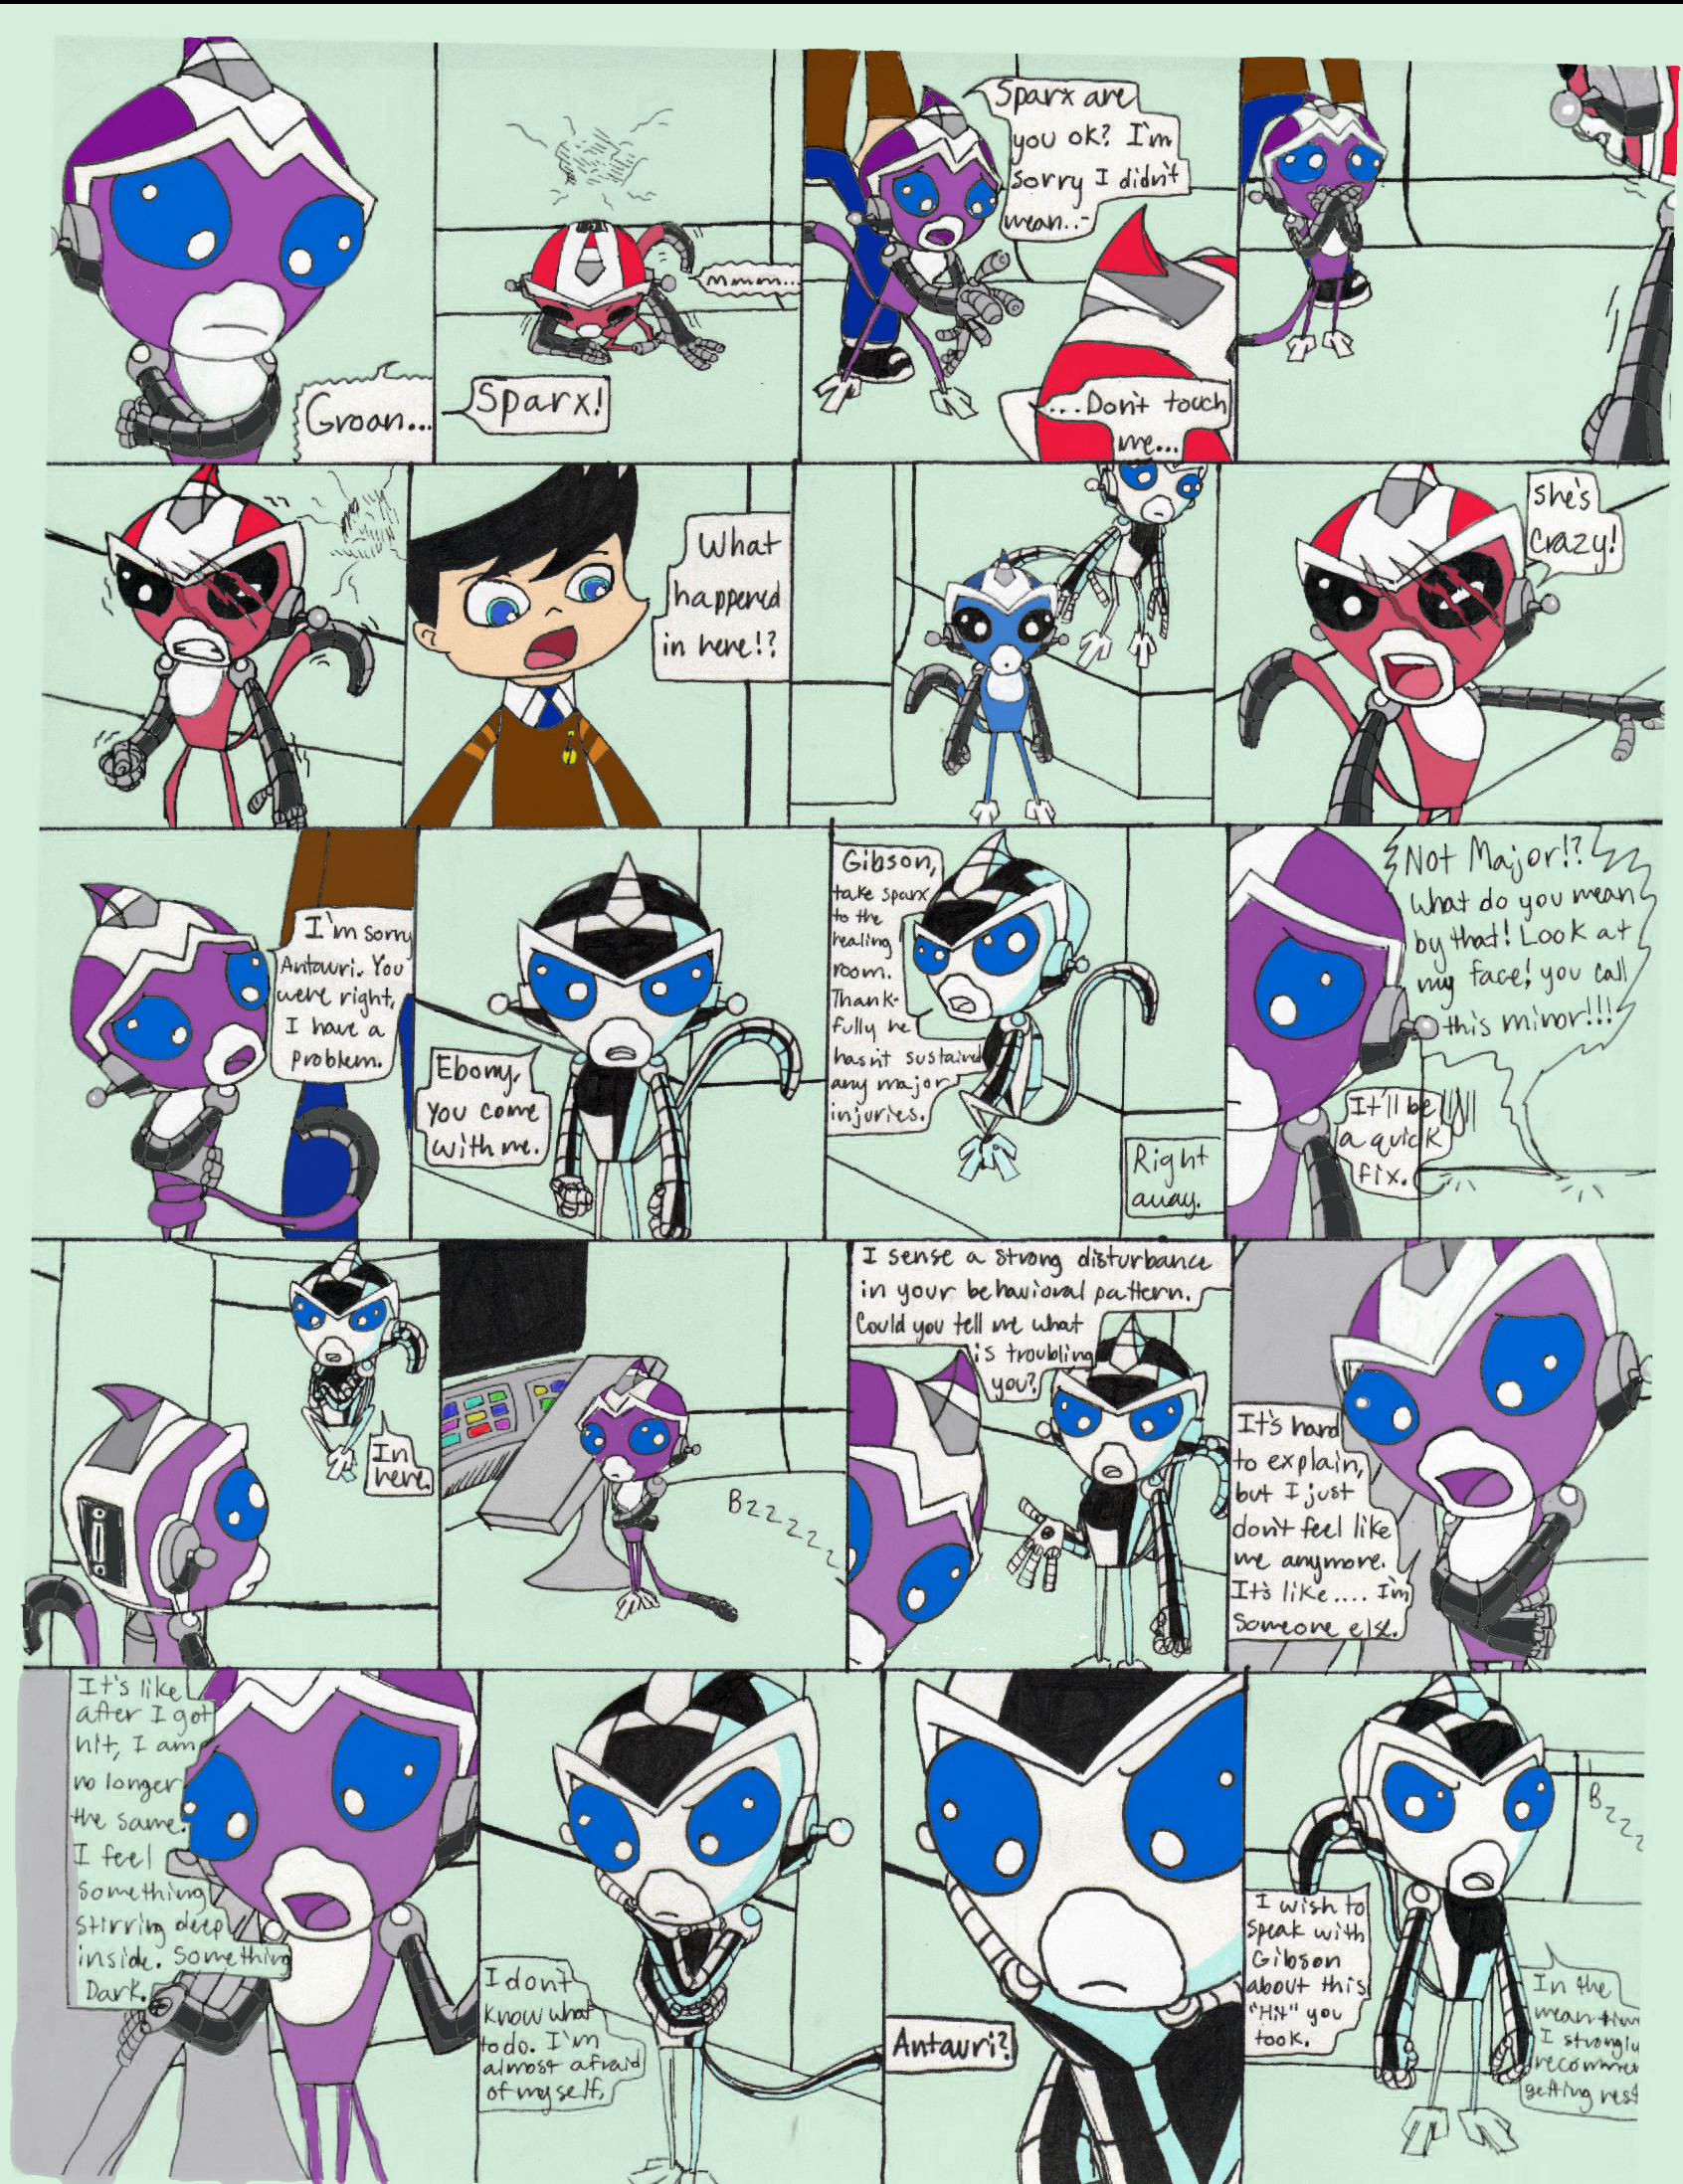 Emergence of Evil" pg.5 by evil_within_u